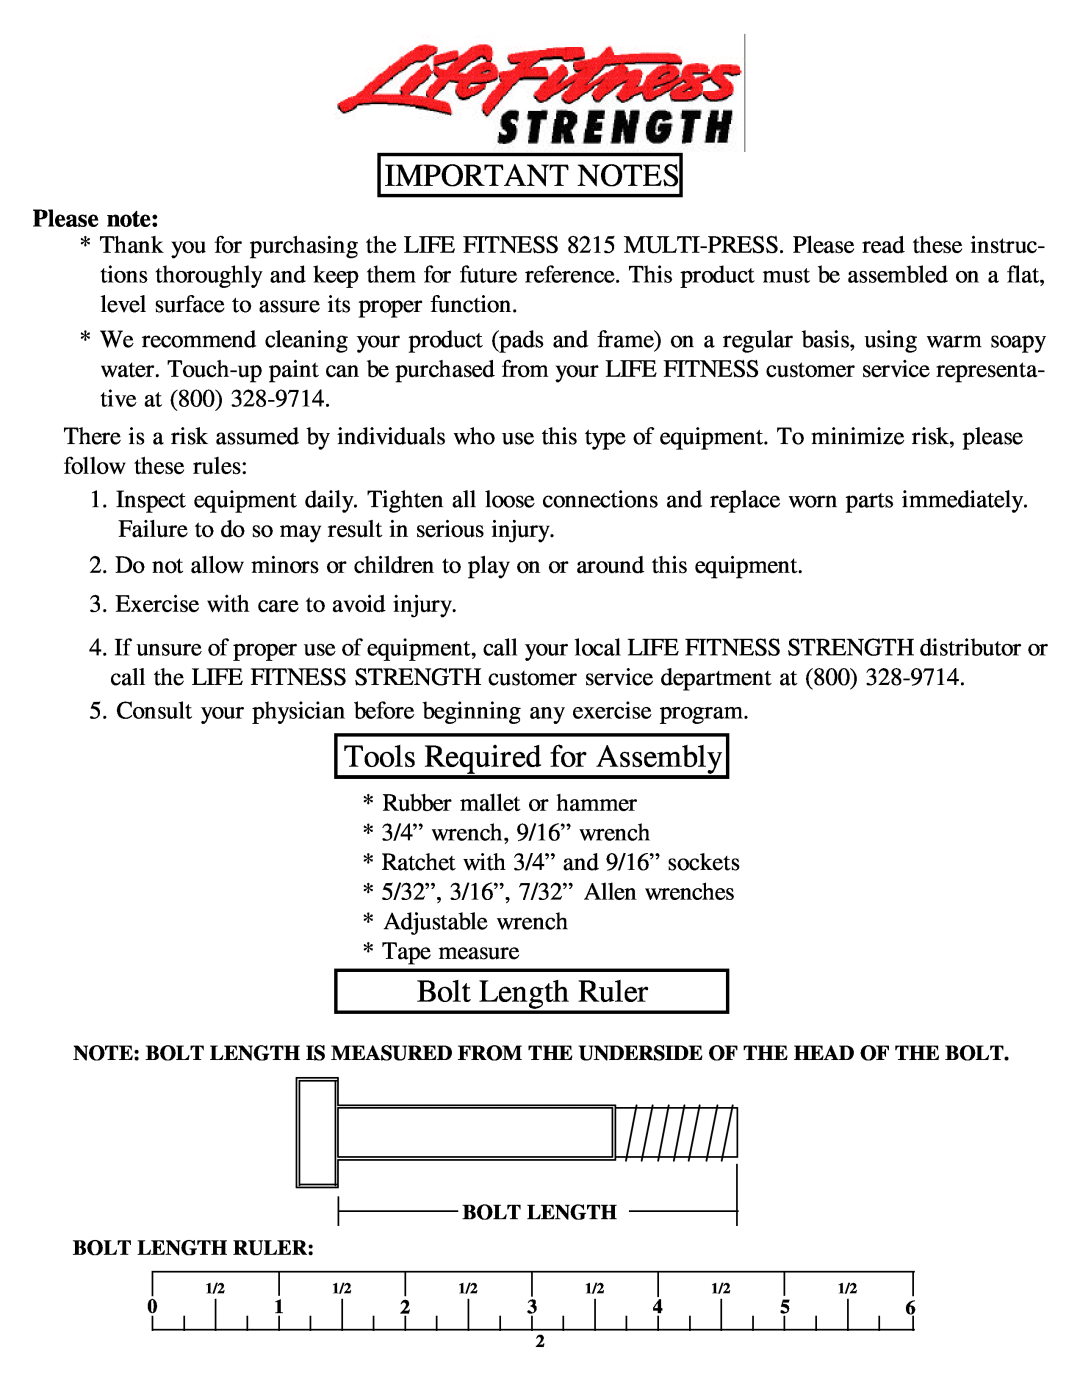 Life Fitness 8215 manual Tools Required for Assembly, Bolt Length Ruler, Please note 